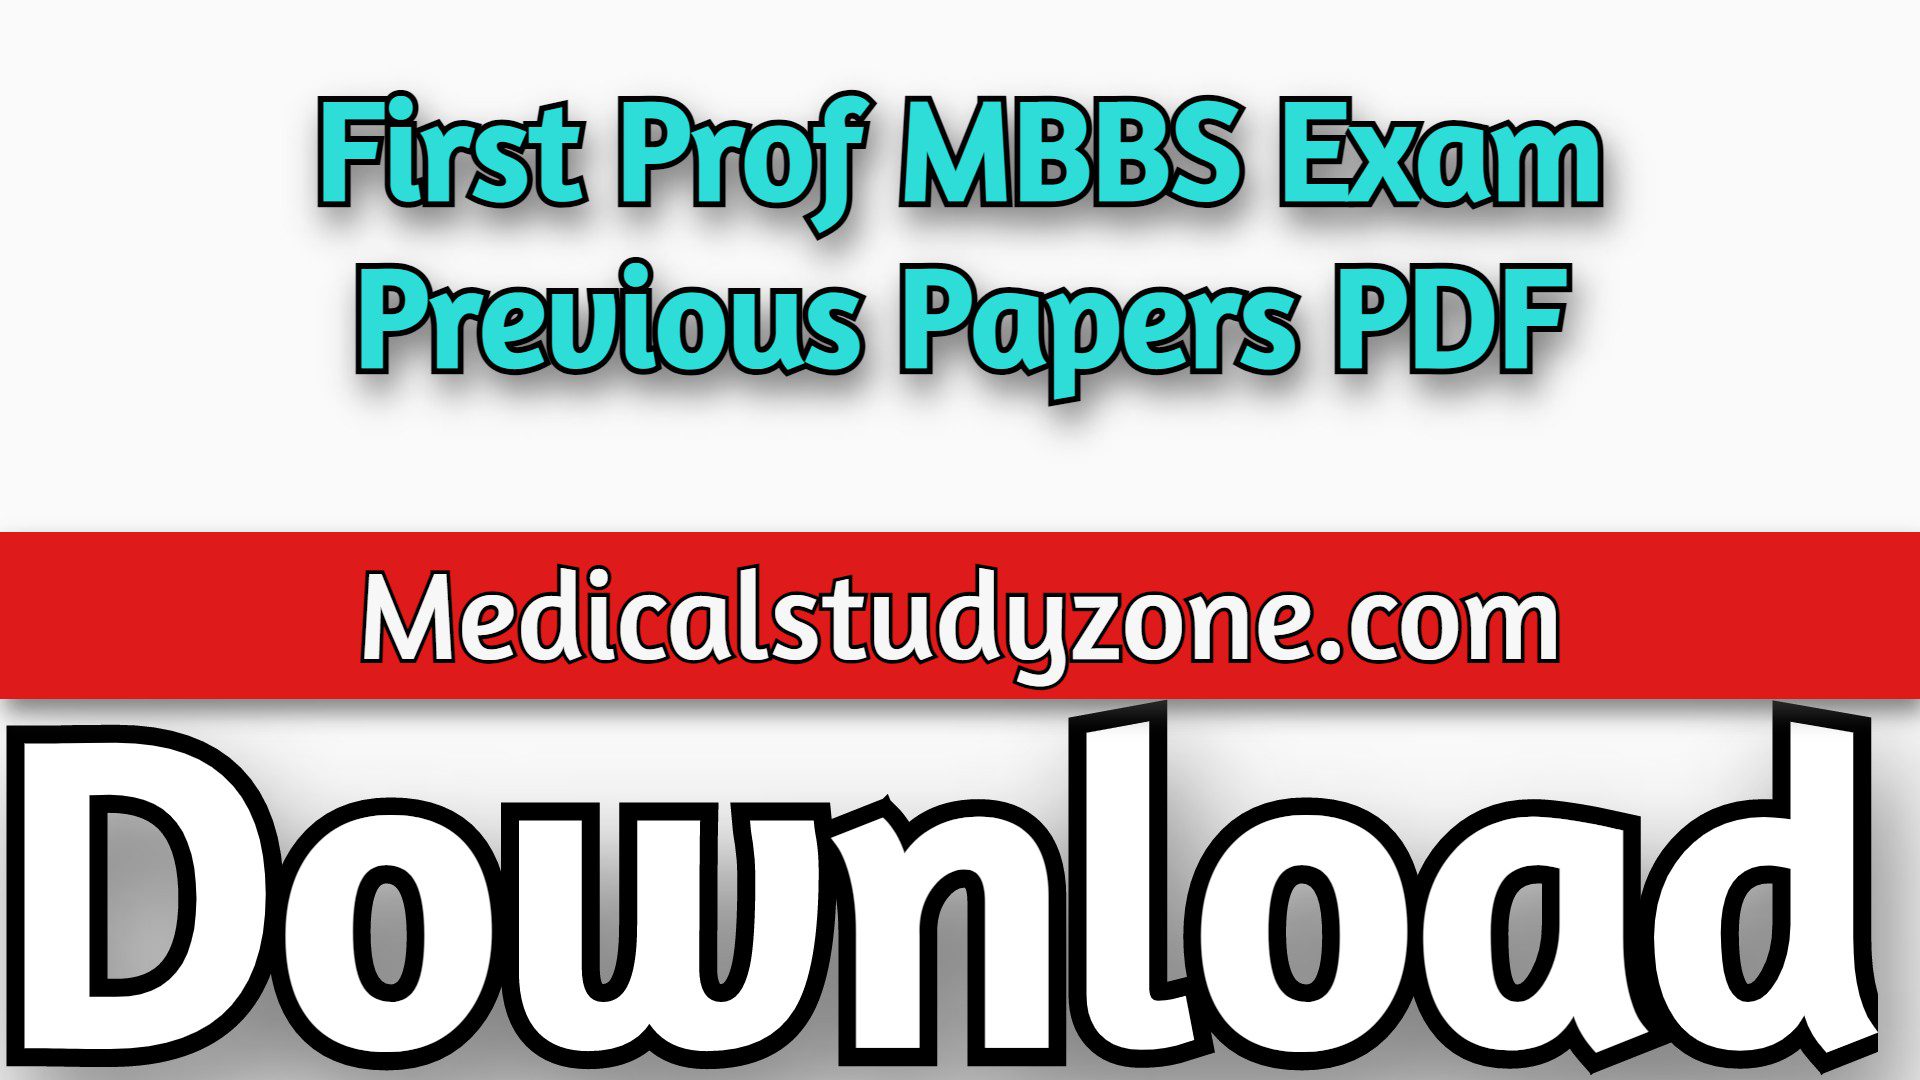 First Prof MBBS Exam Previous Papers PDF Free Download